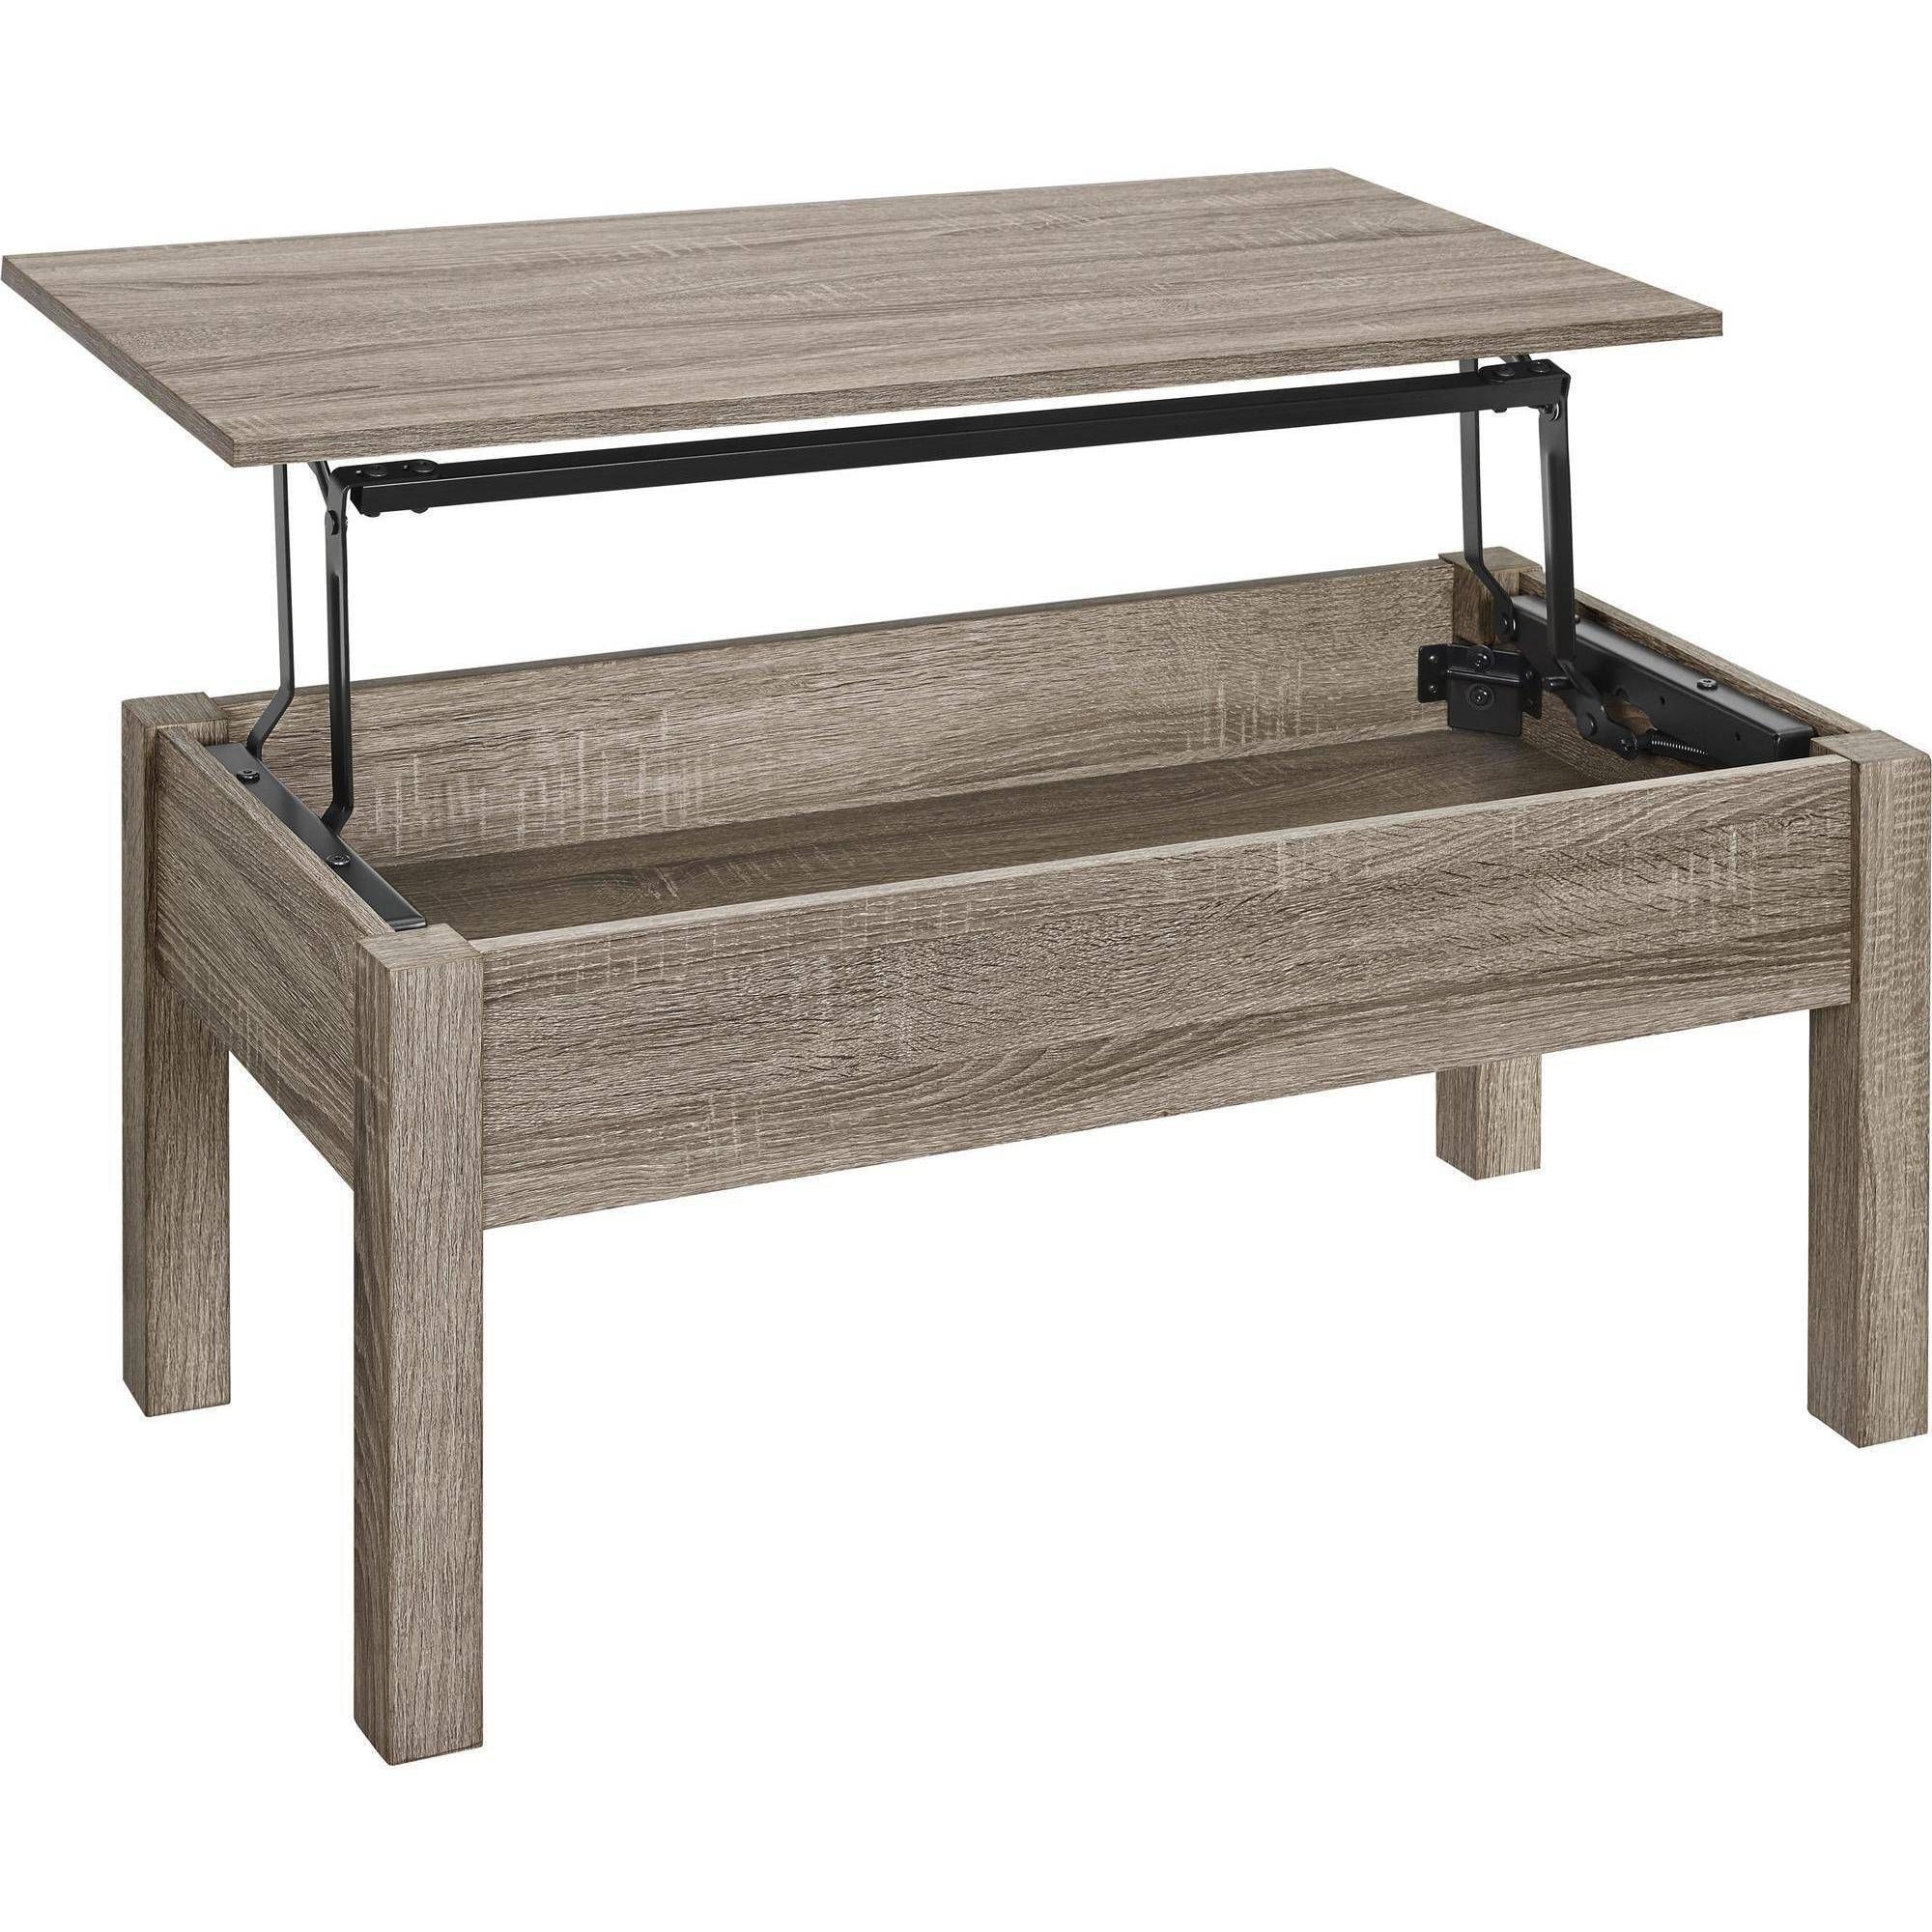 Mainstays Lift Top Coffee Table, Multiple Colors – Walmart In Flip Top Coffee Tables (View 1 of 30)